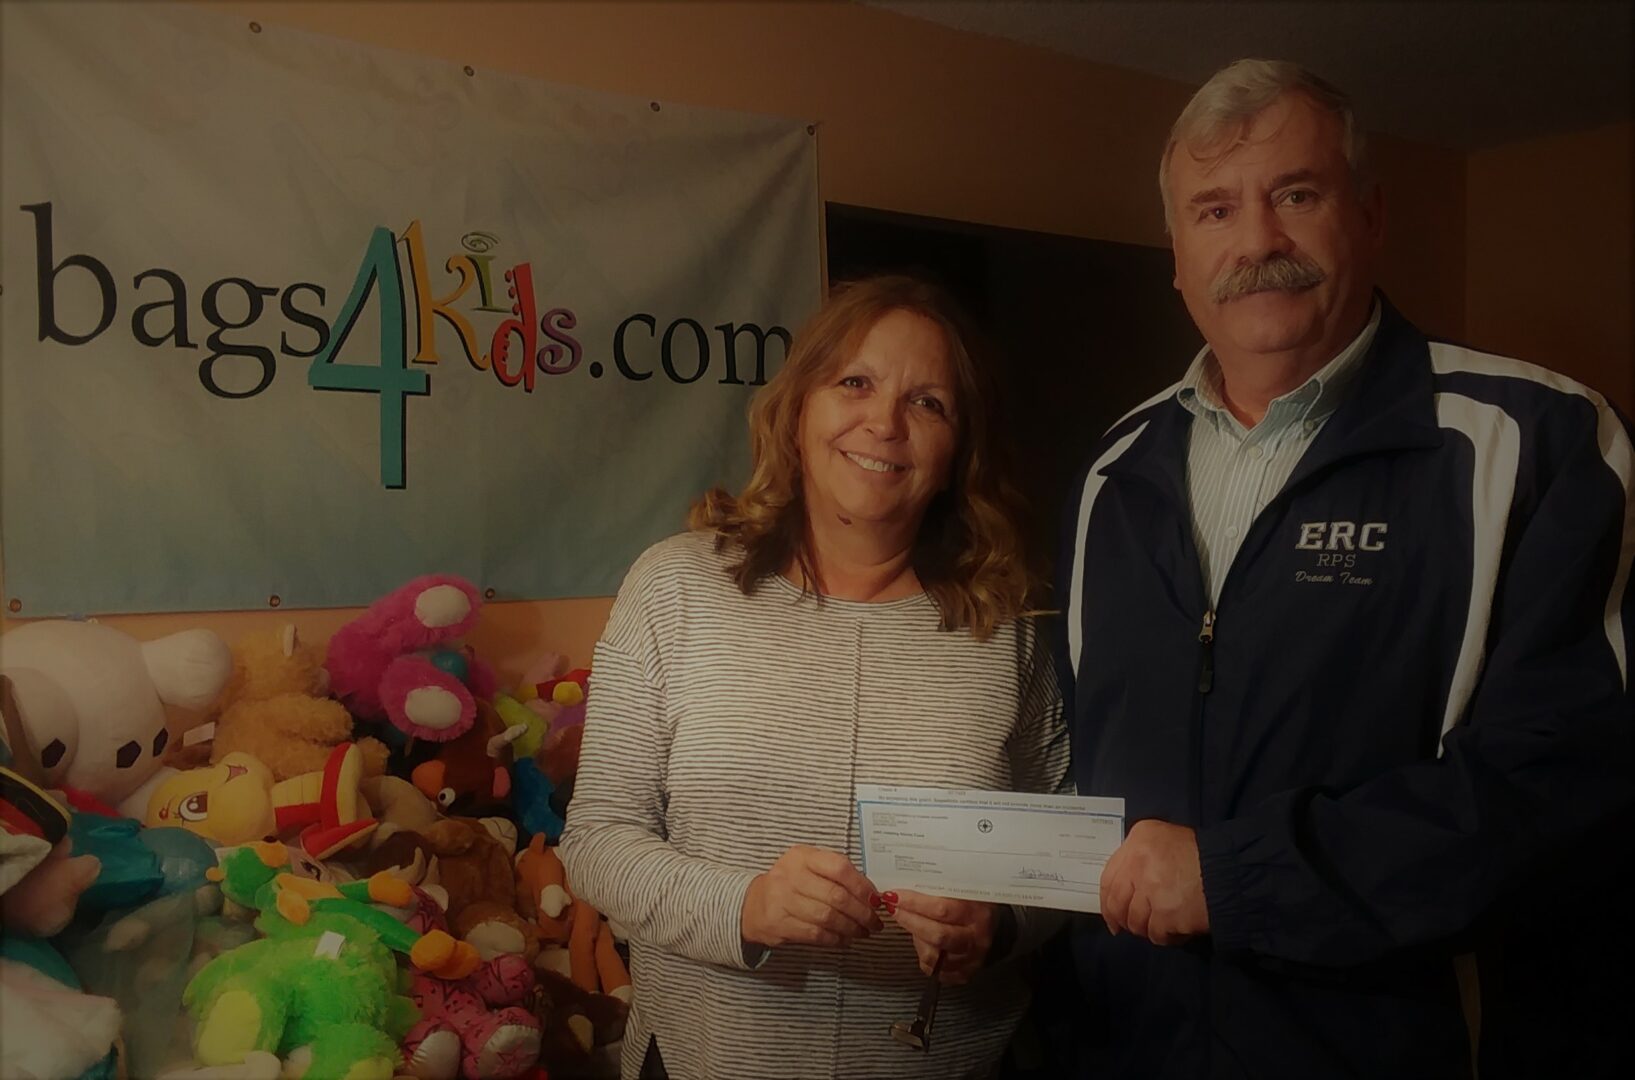 LaJuana Moser donating a check to Bags4Kids